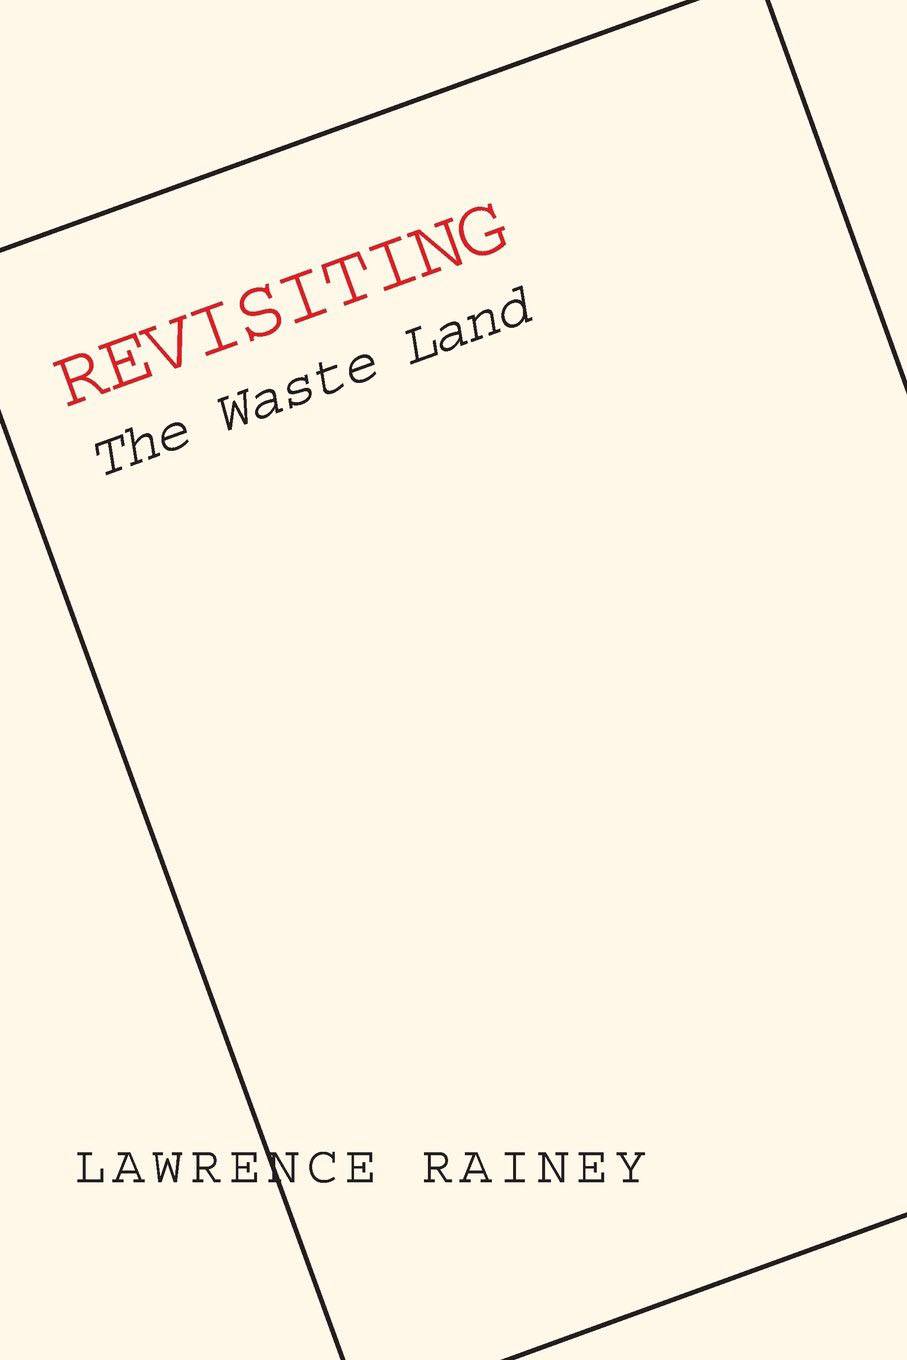 "Revisiting The Waste Land"